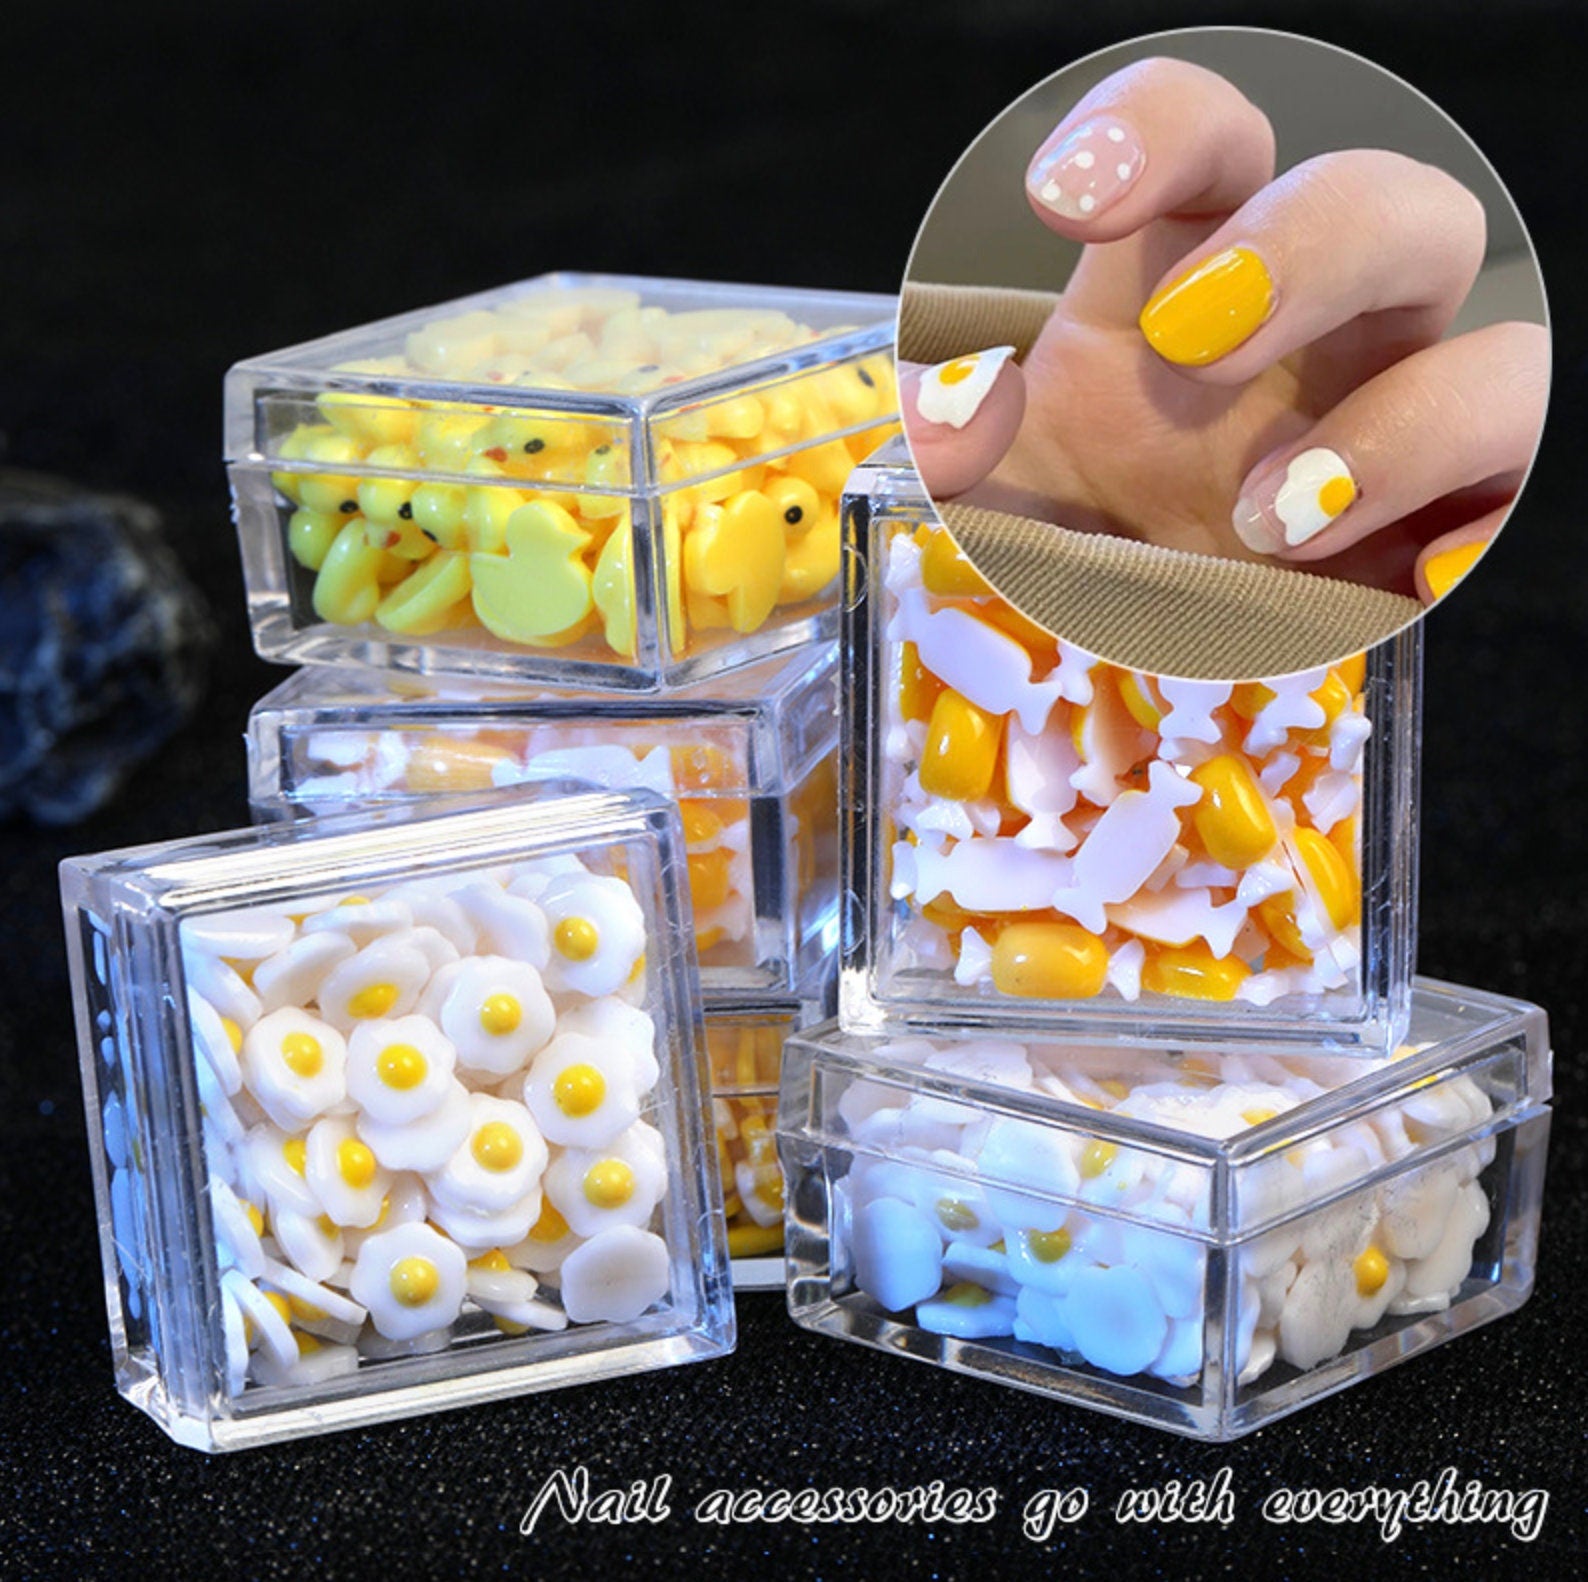 Tiny Resin Charms (Egg, Duck, Candy, Lollipop) Nail Art Charms